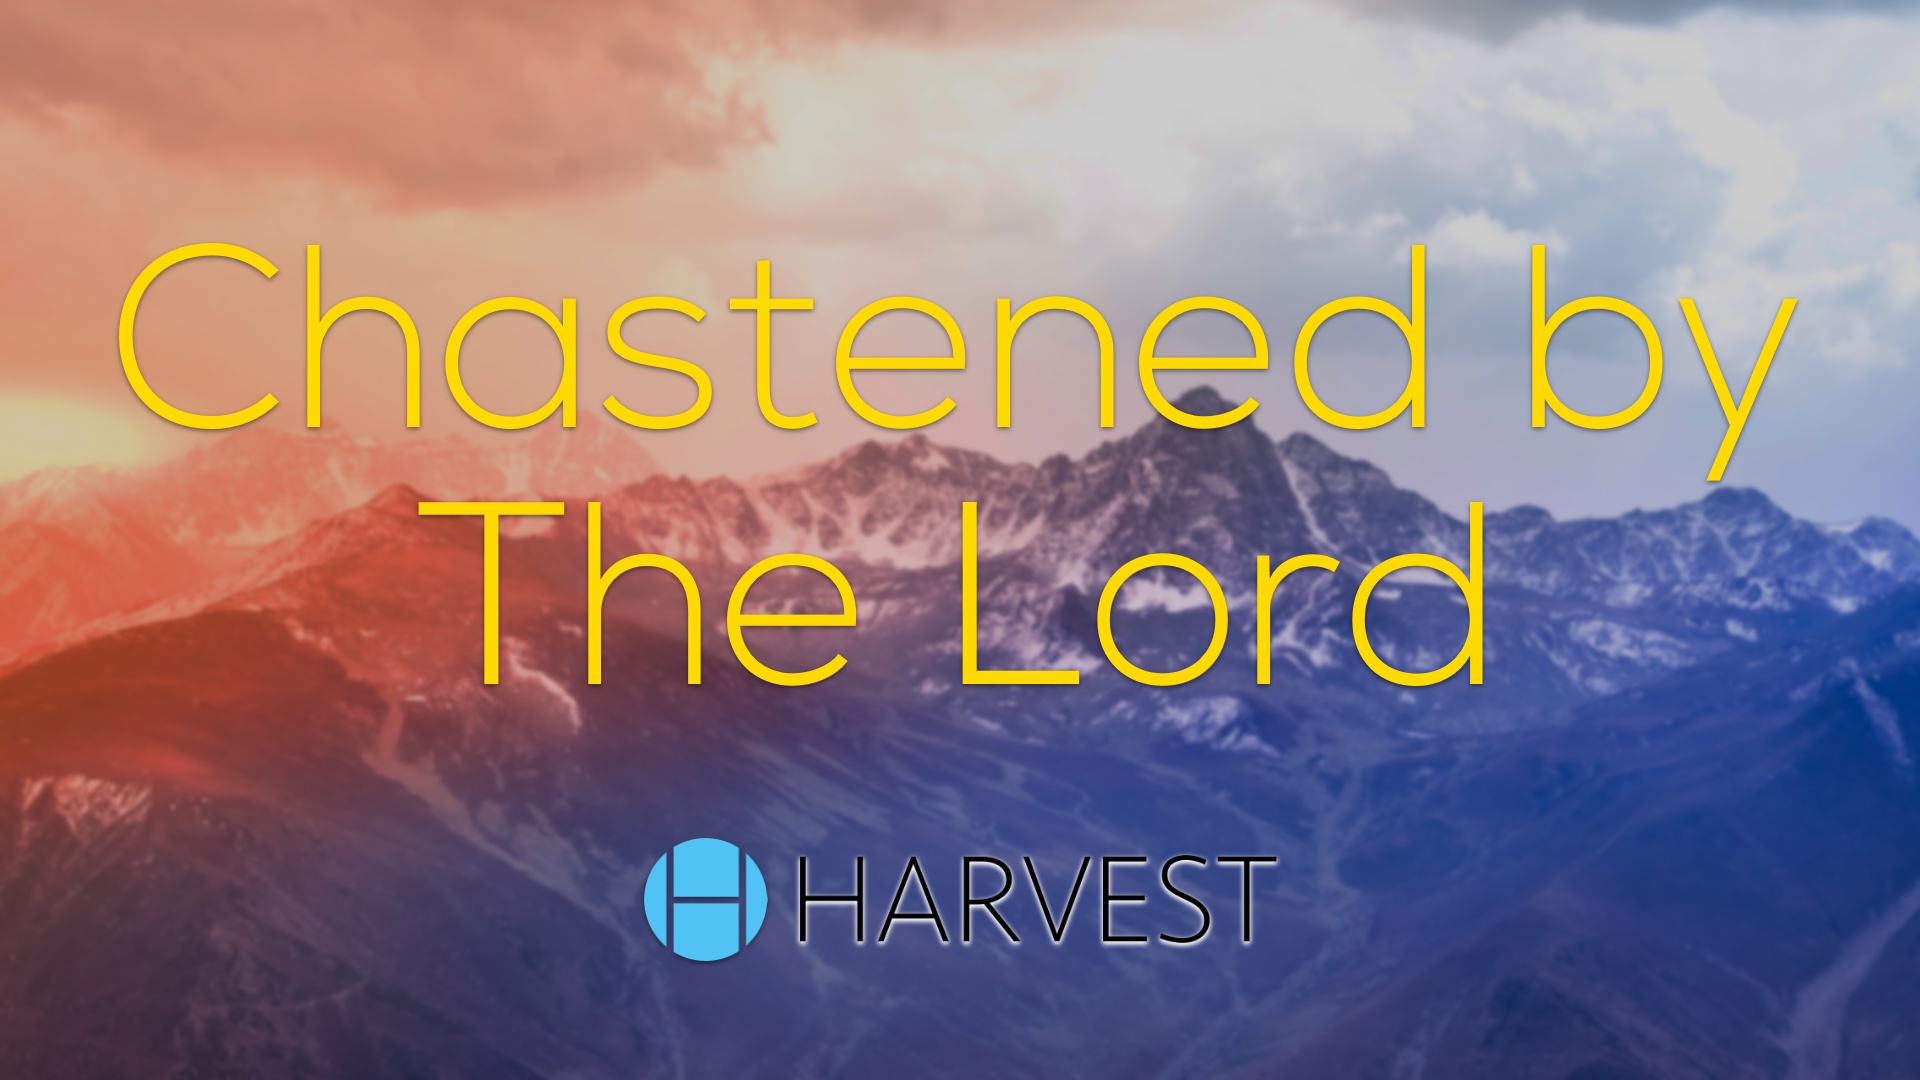 Chastened by The Lord